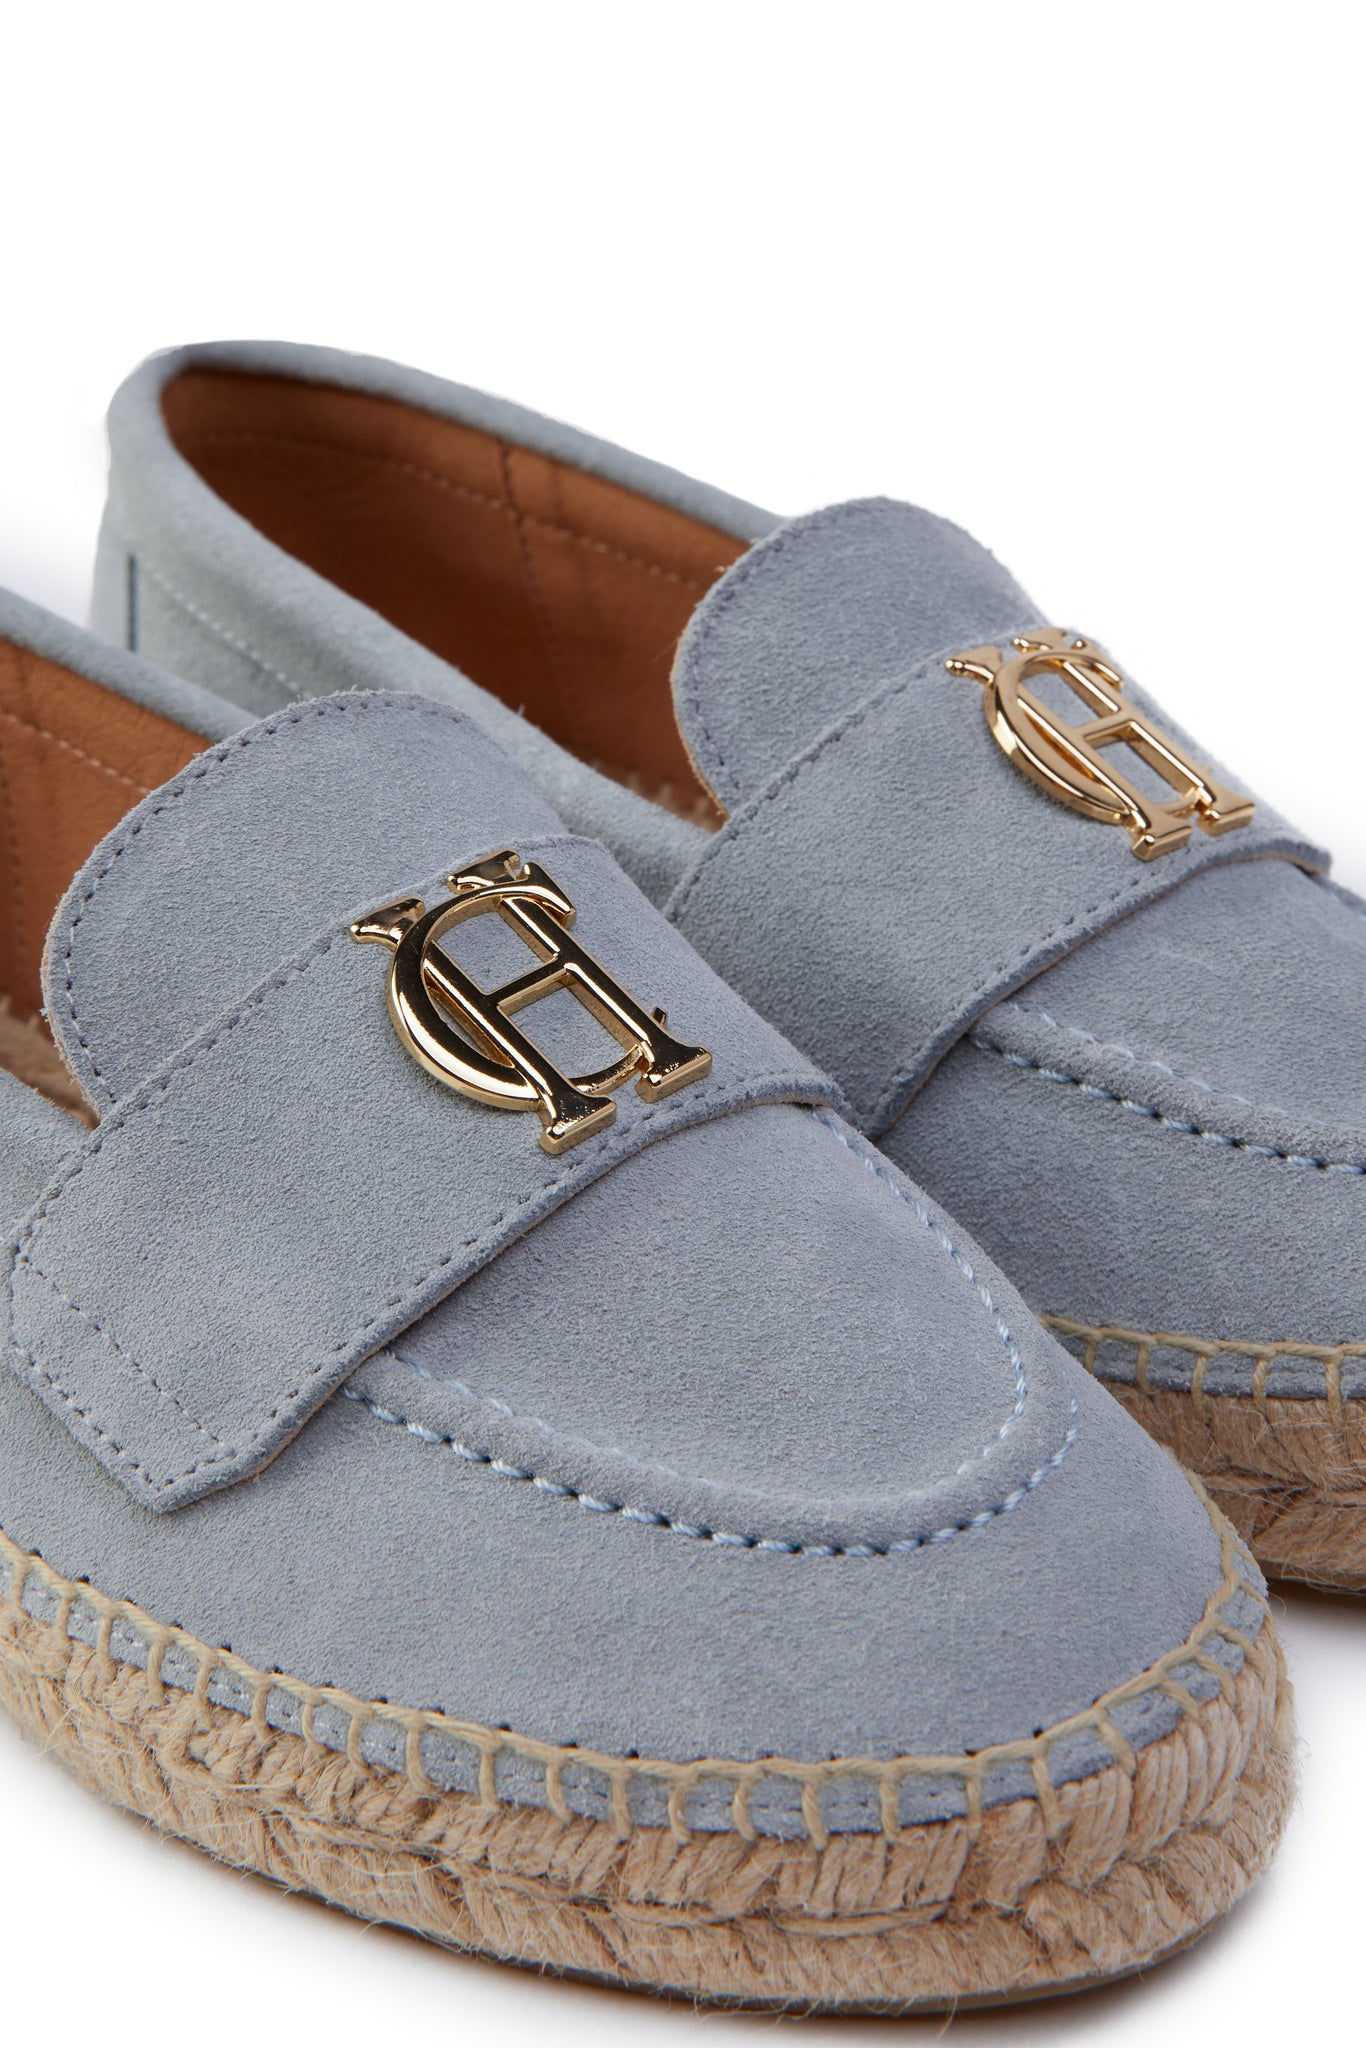 Close up of gold hardware on light blue suede classic espadrille with plaited jute sole